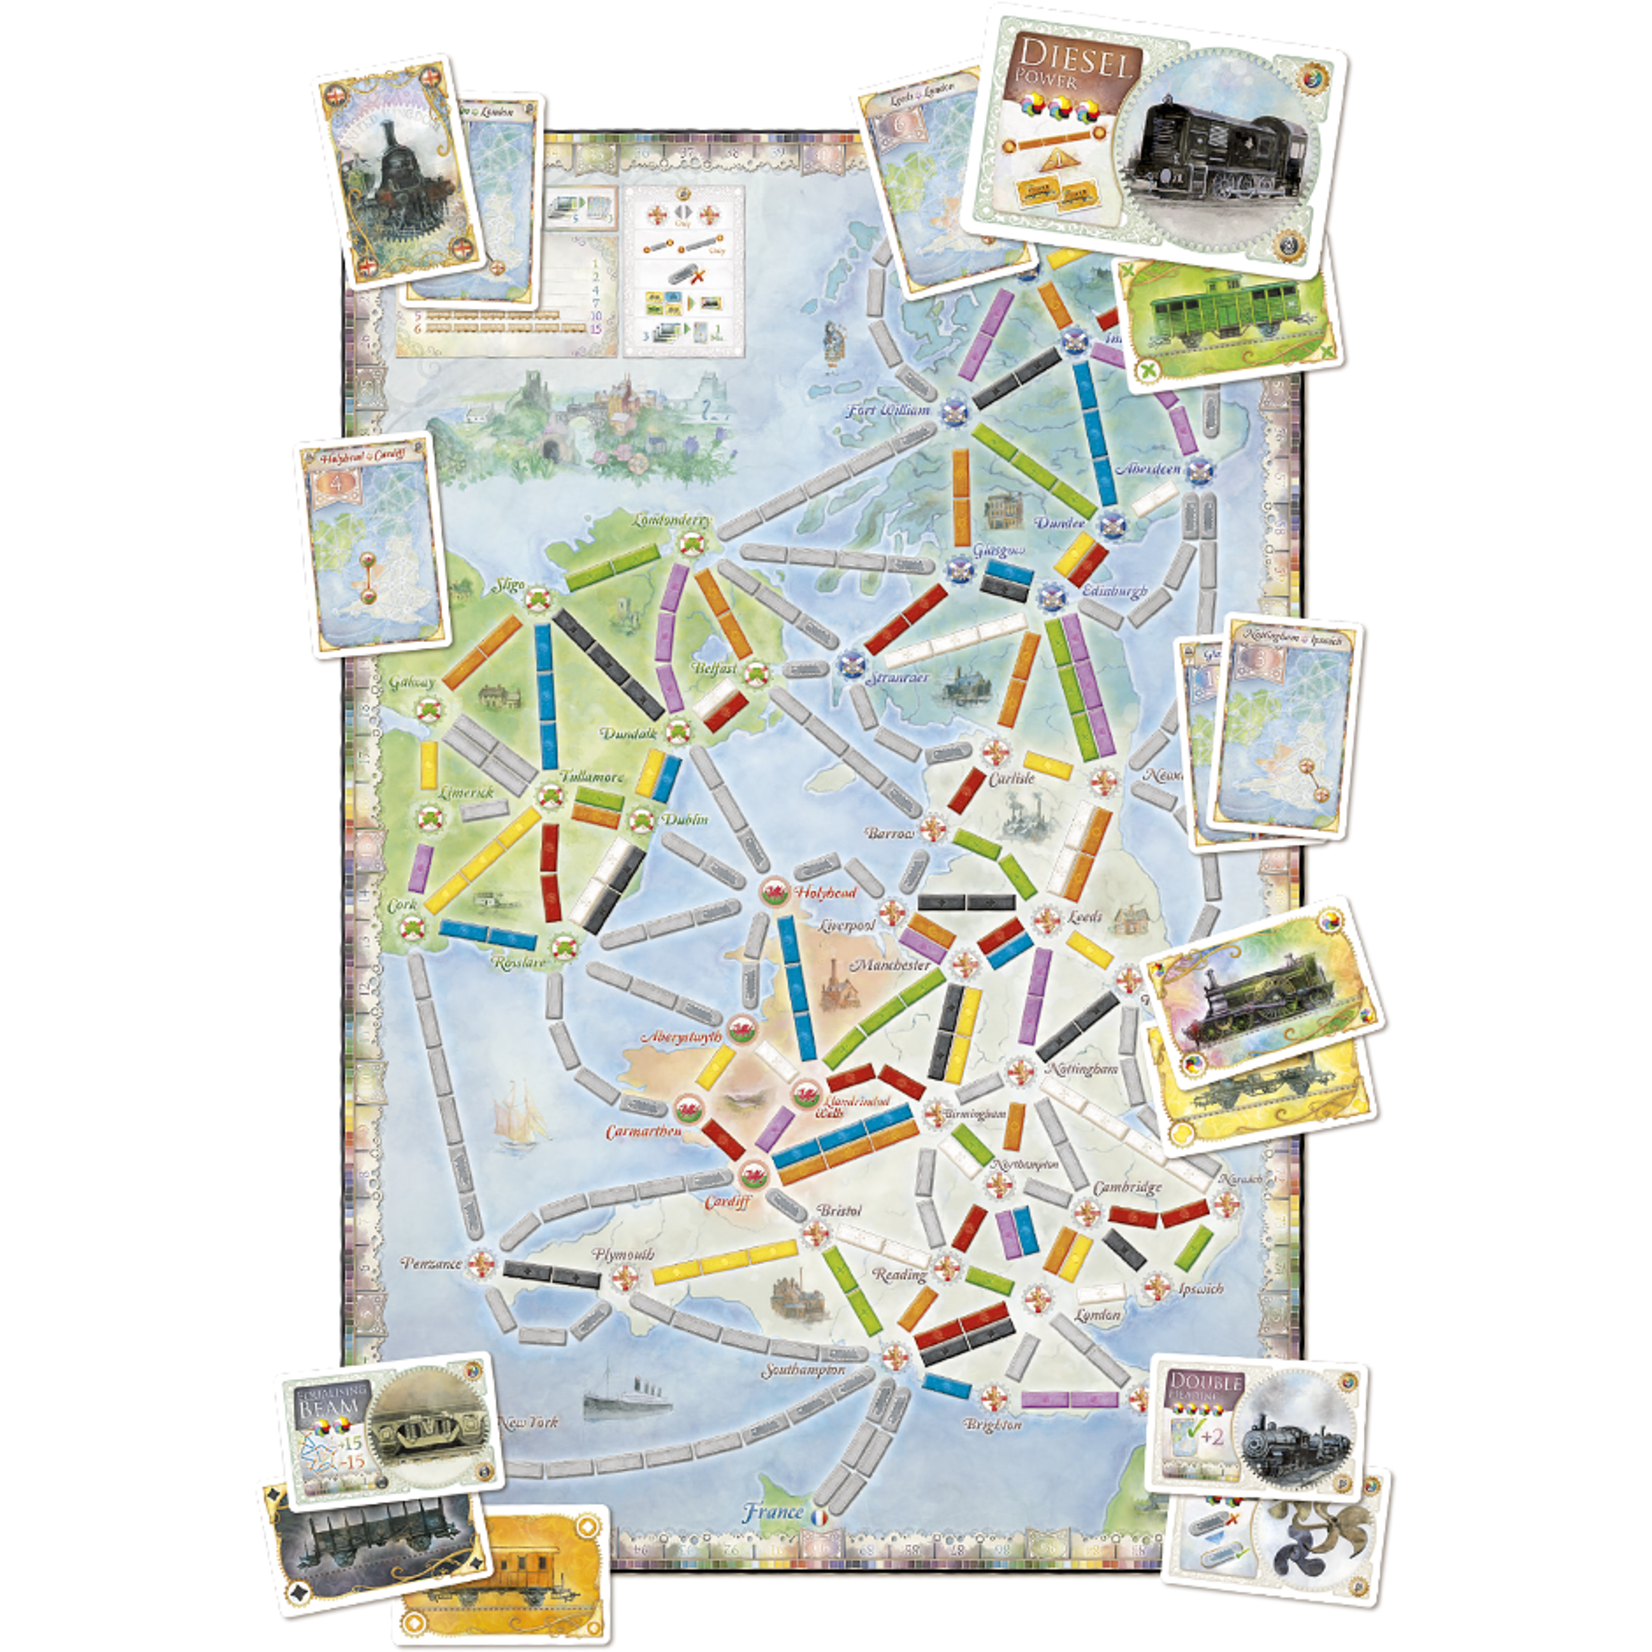 Days of Wonder Ticket to Ride Map Collection: Volume 5 – United Kingdom & Pennsylvania (expansion)